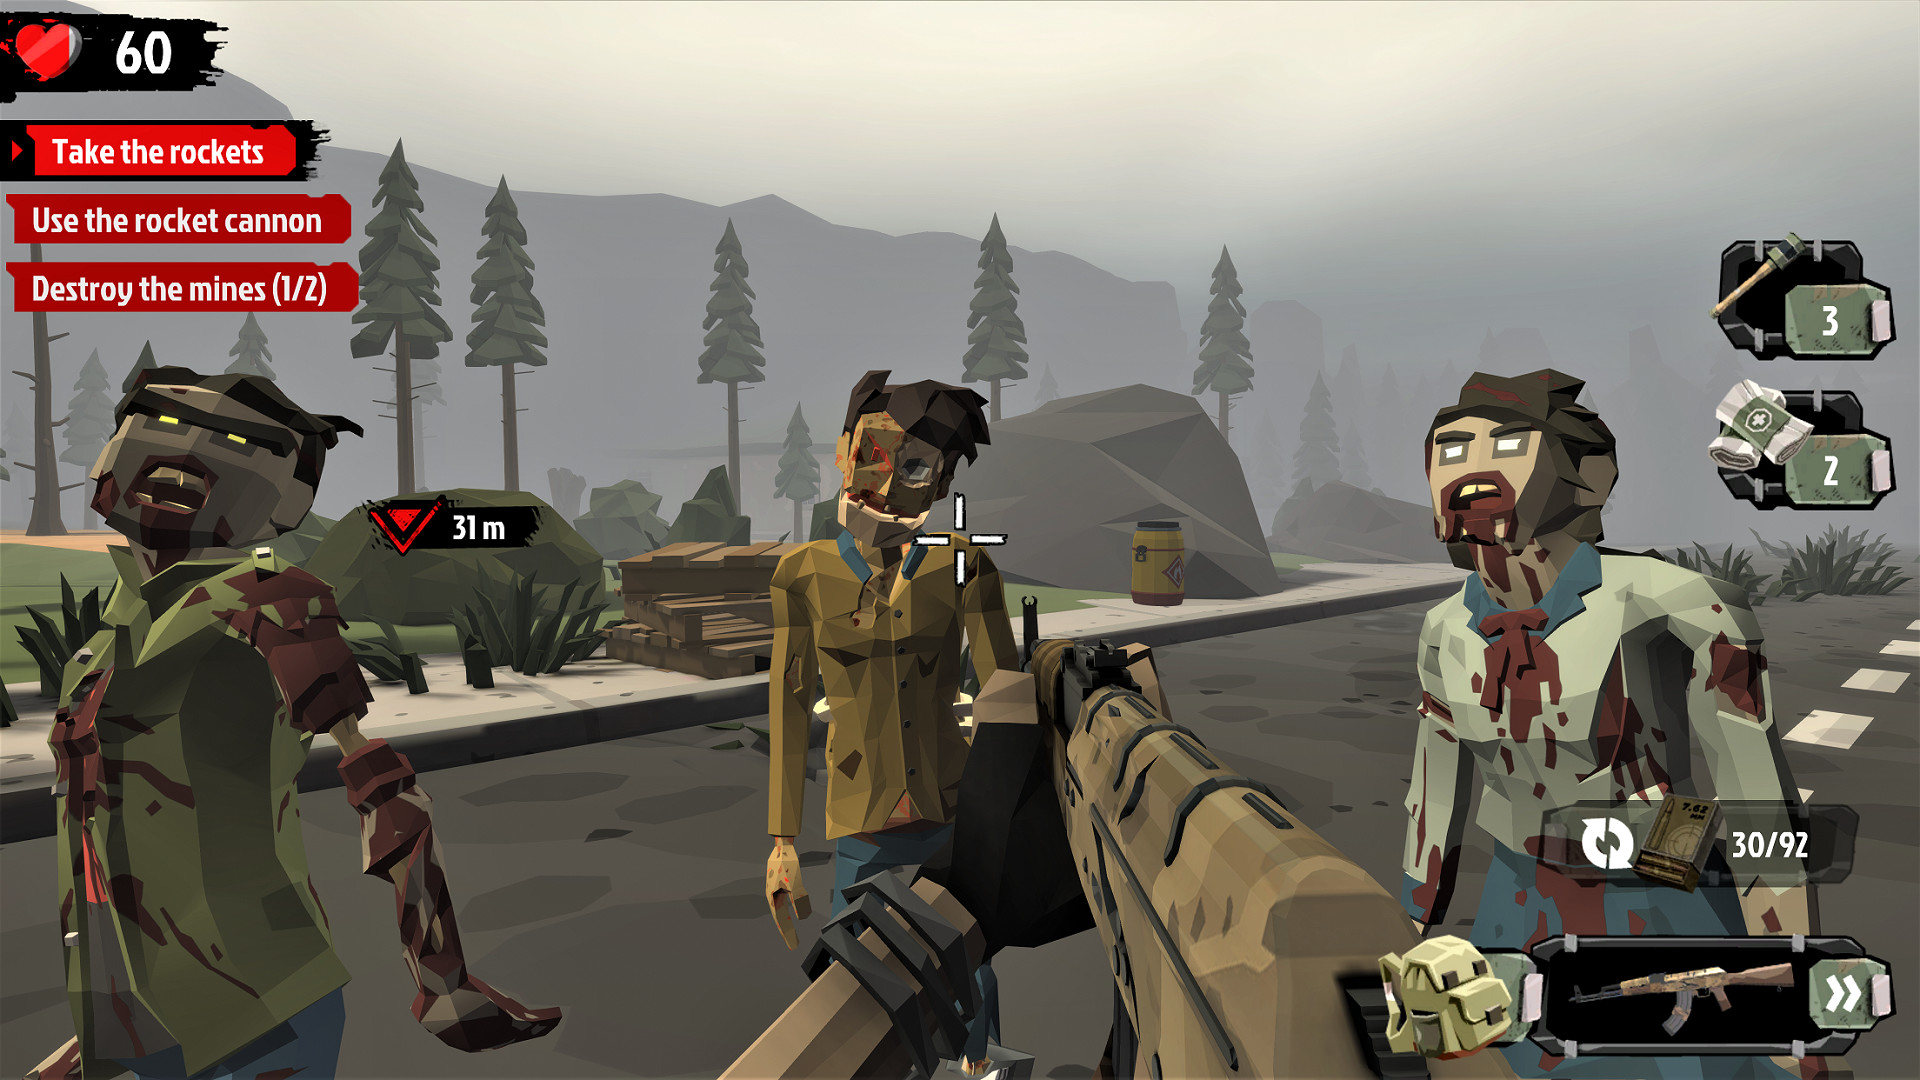 The walking zombie 2 игры мод. The Walking Zombie 2: зомби шутер. Зомби из игры the Walking Zombie 2.